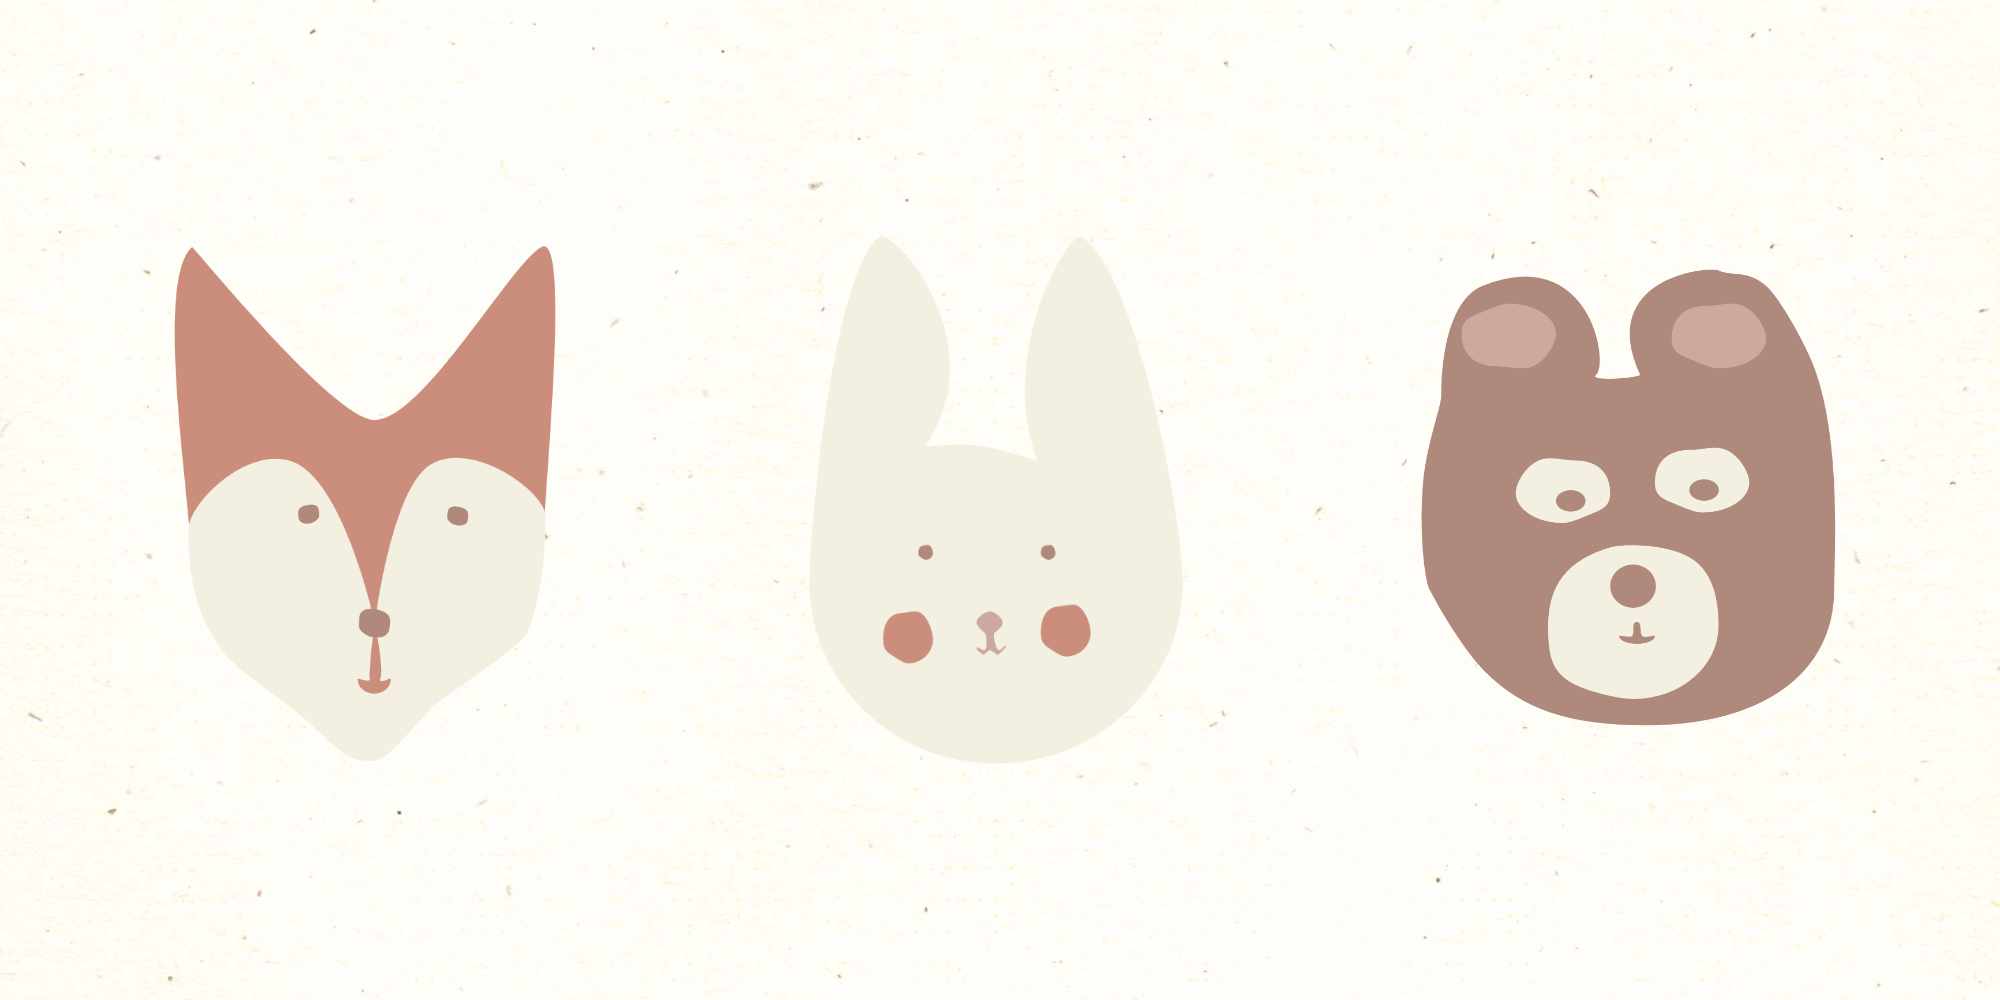  Faces of three cute woodland animals: a fox, a bunny, and a bear, arranged on a speckled paper background in natural colors.